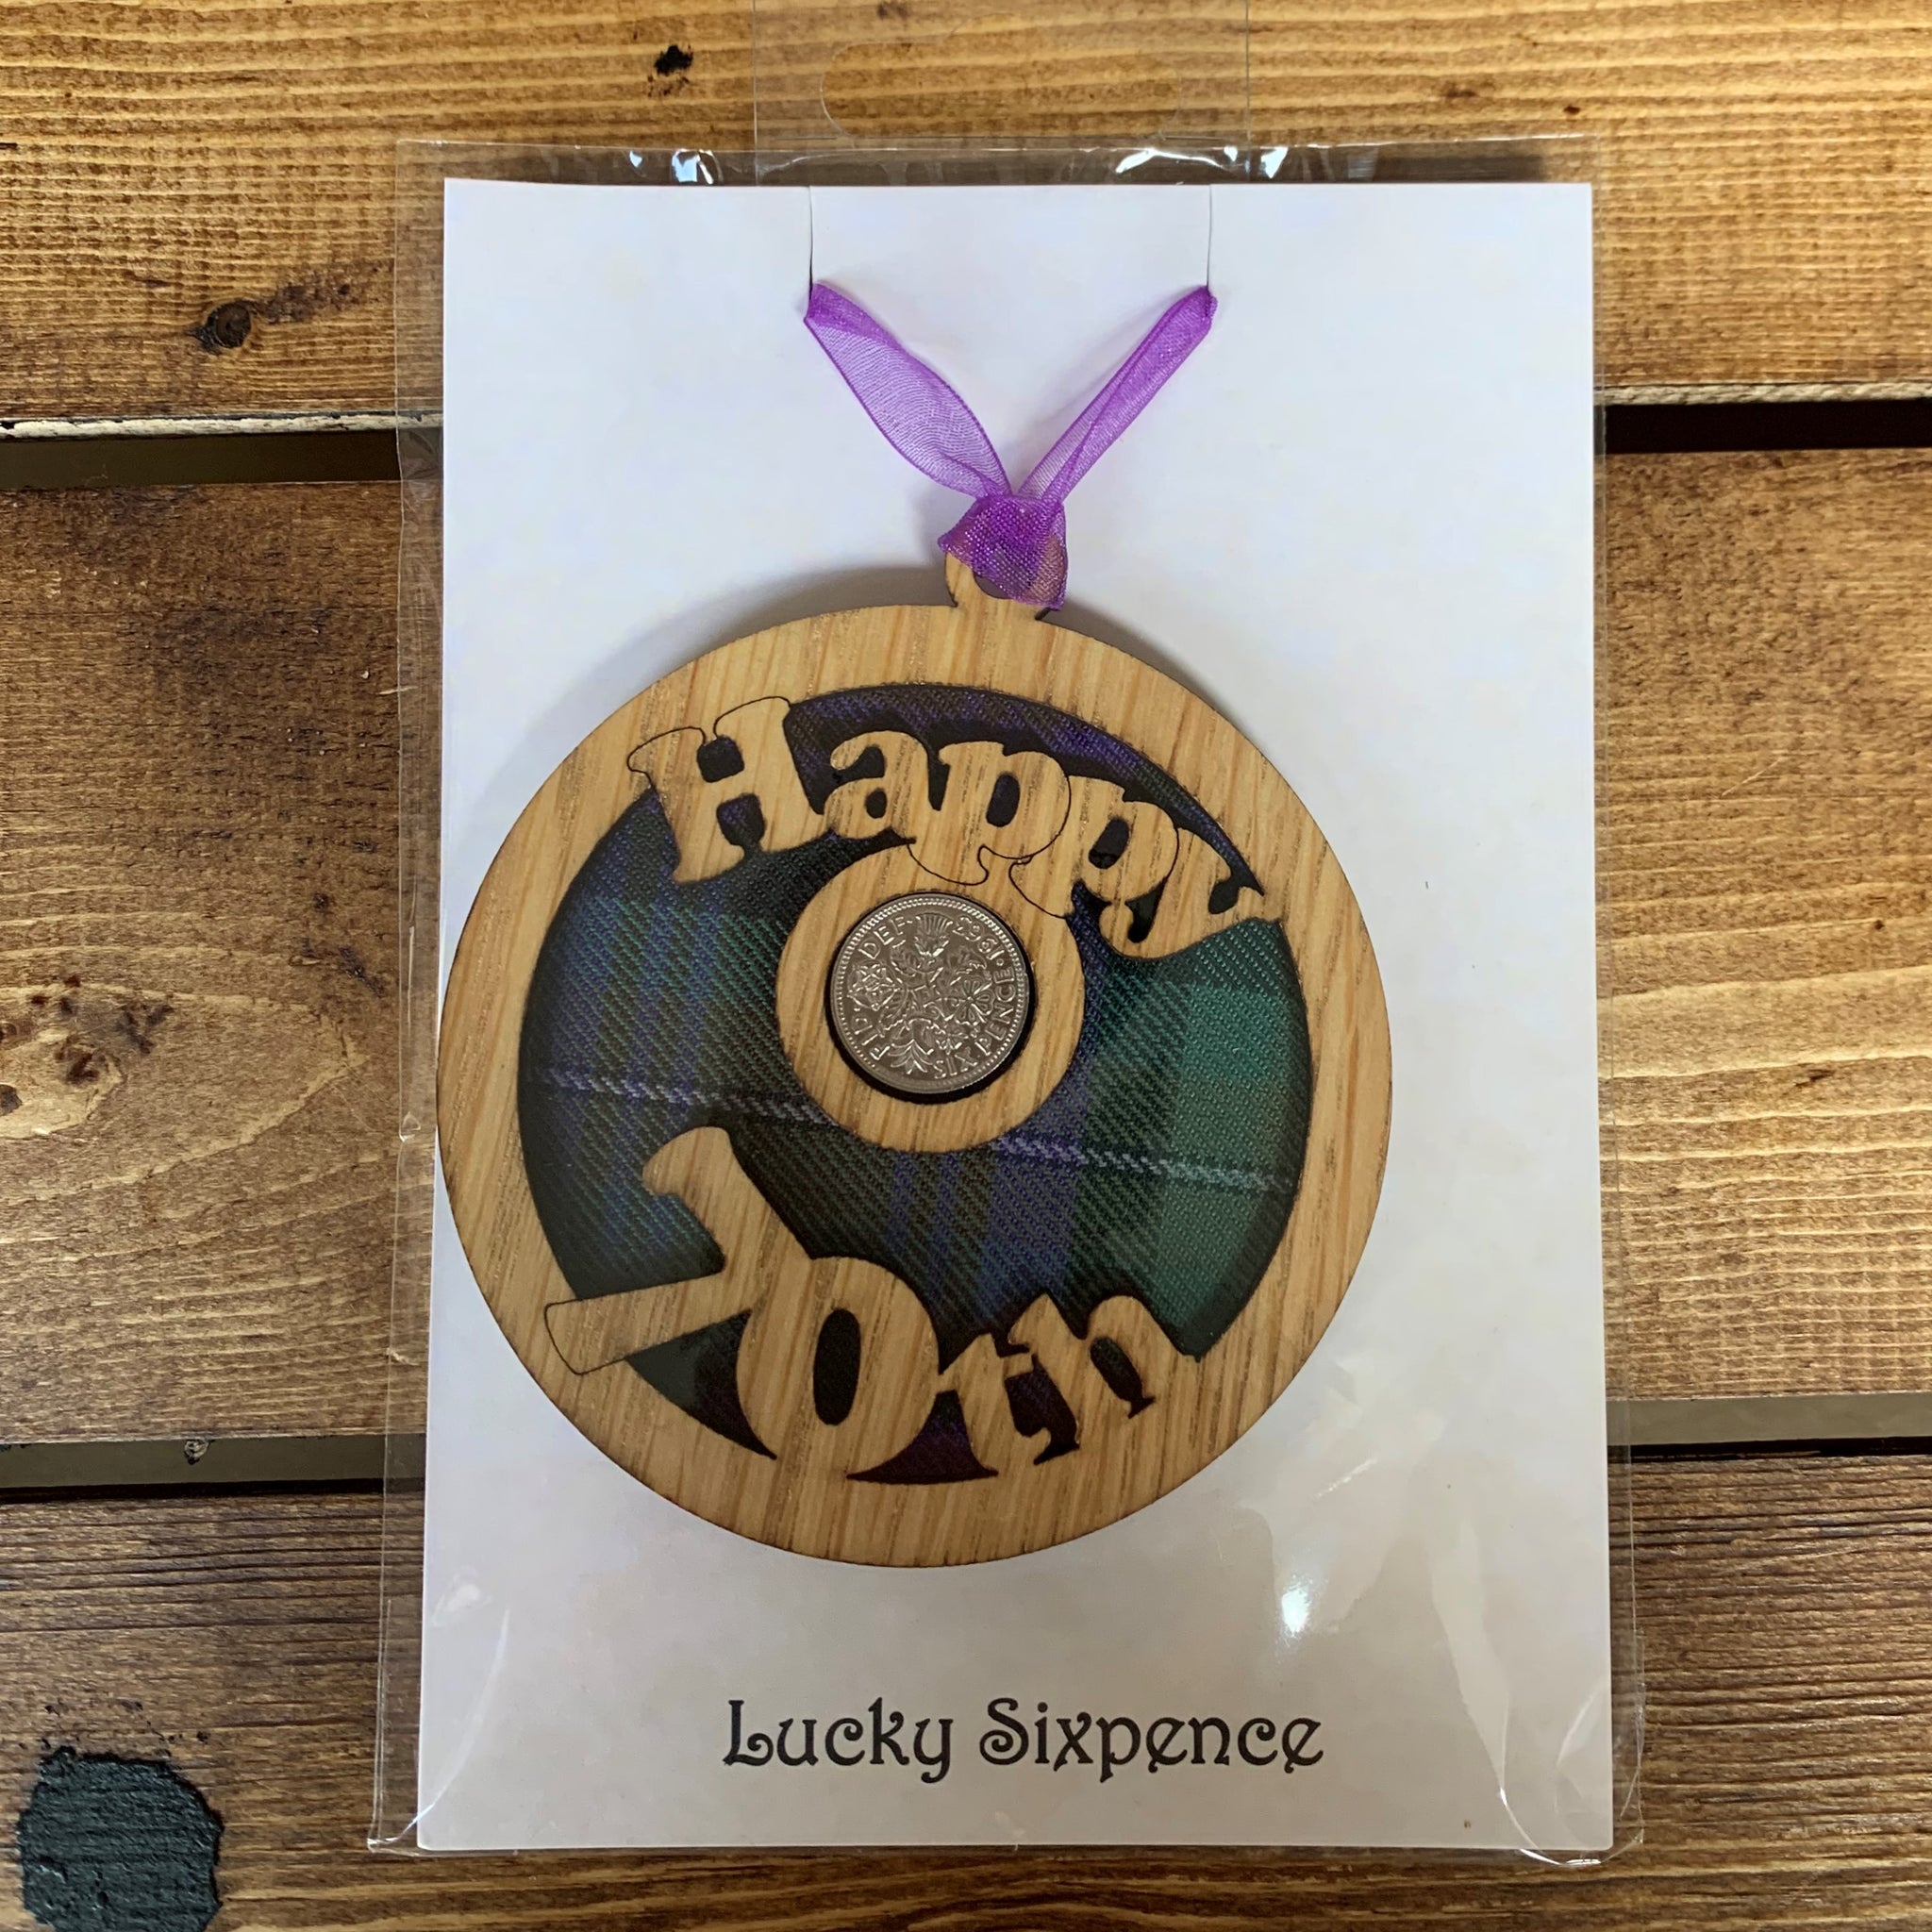 A unique keepsake gift with a Scottish twist.  The sixpence is mounted onto a round hanging oak veneered wood with tartan inserts, mounted on card and packaged in clear cellophane packets.  'Happy 70th' is cut into the wooden hanging.